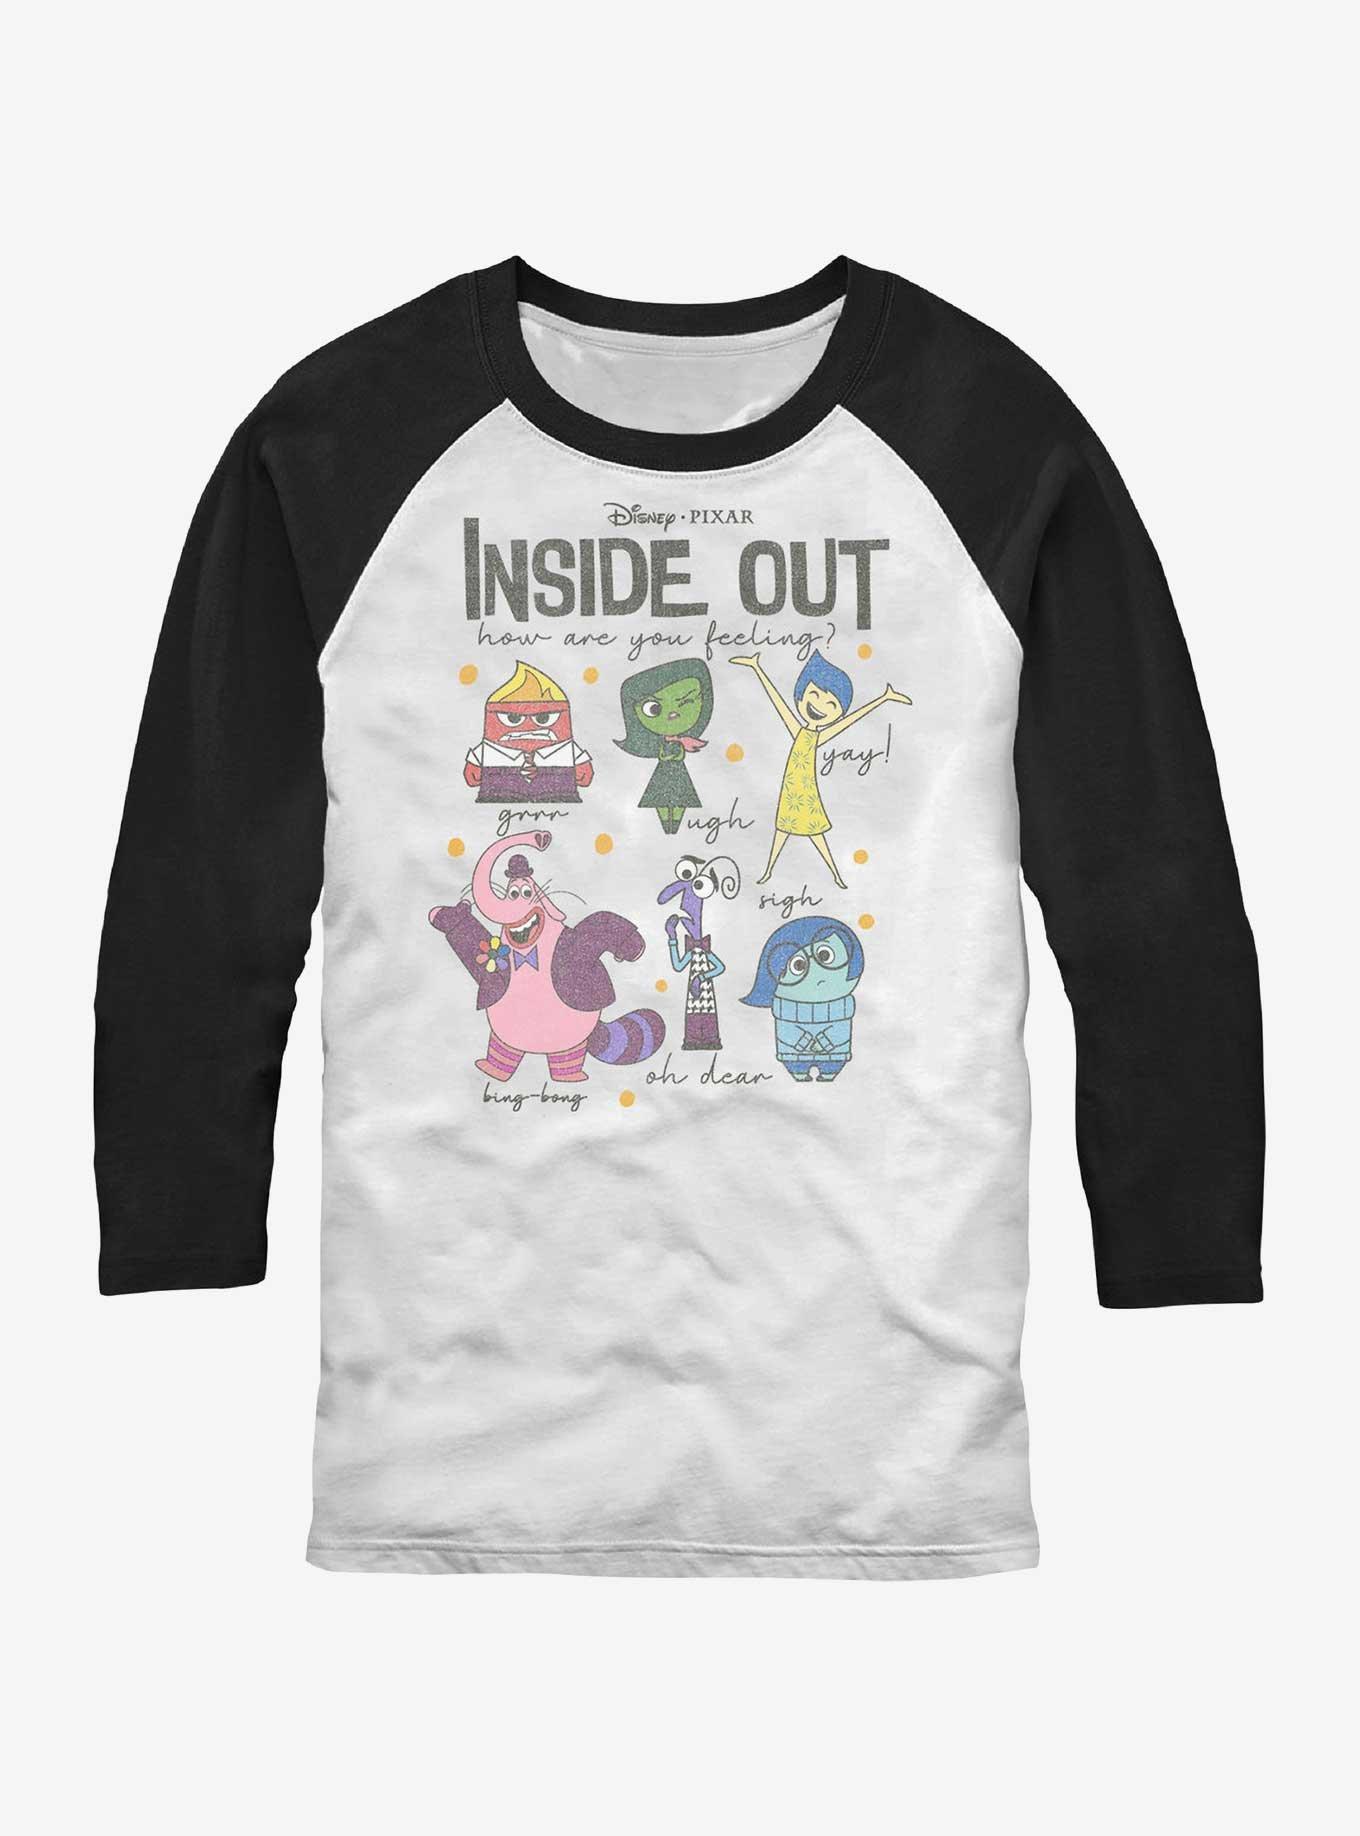 Inside Out Shirts Inside Out Character Shirt All the Feels 